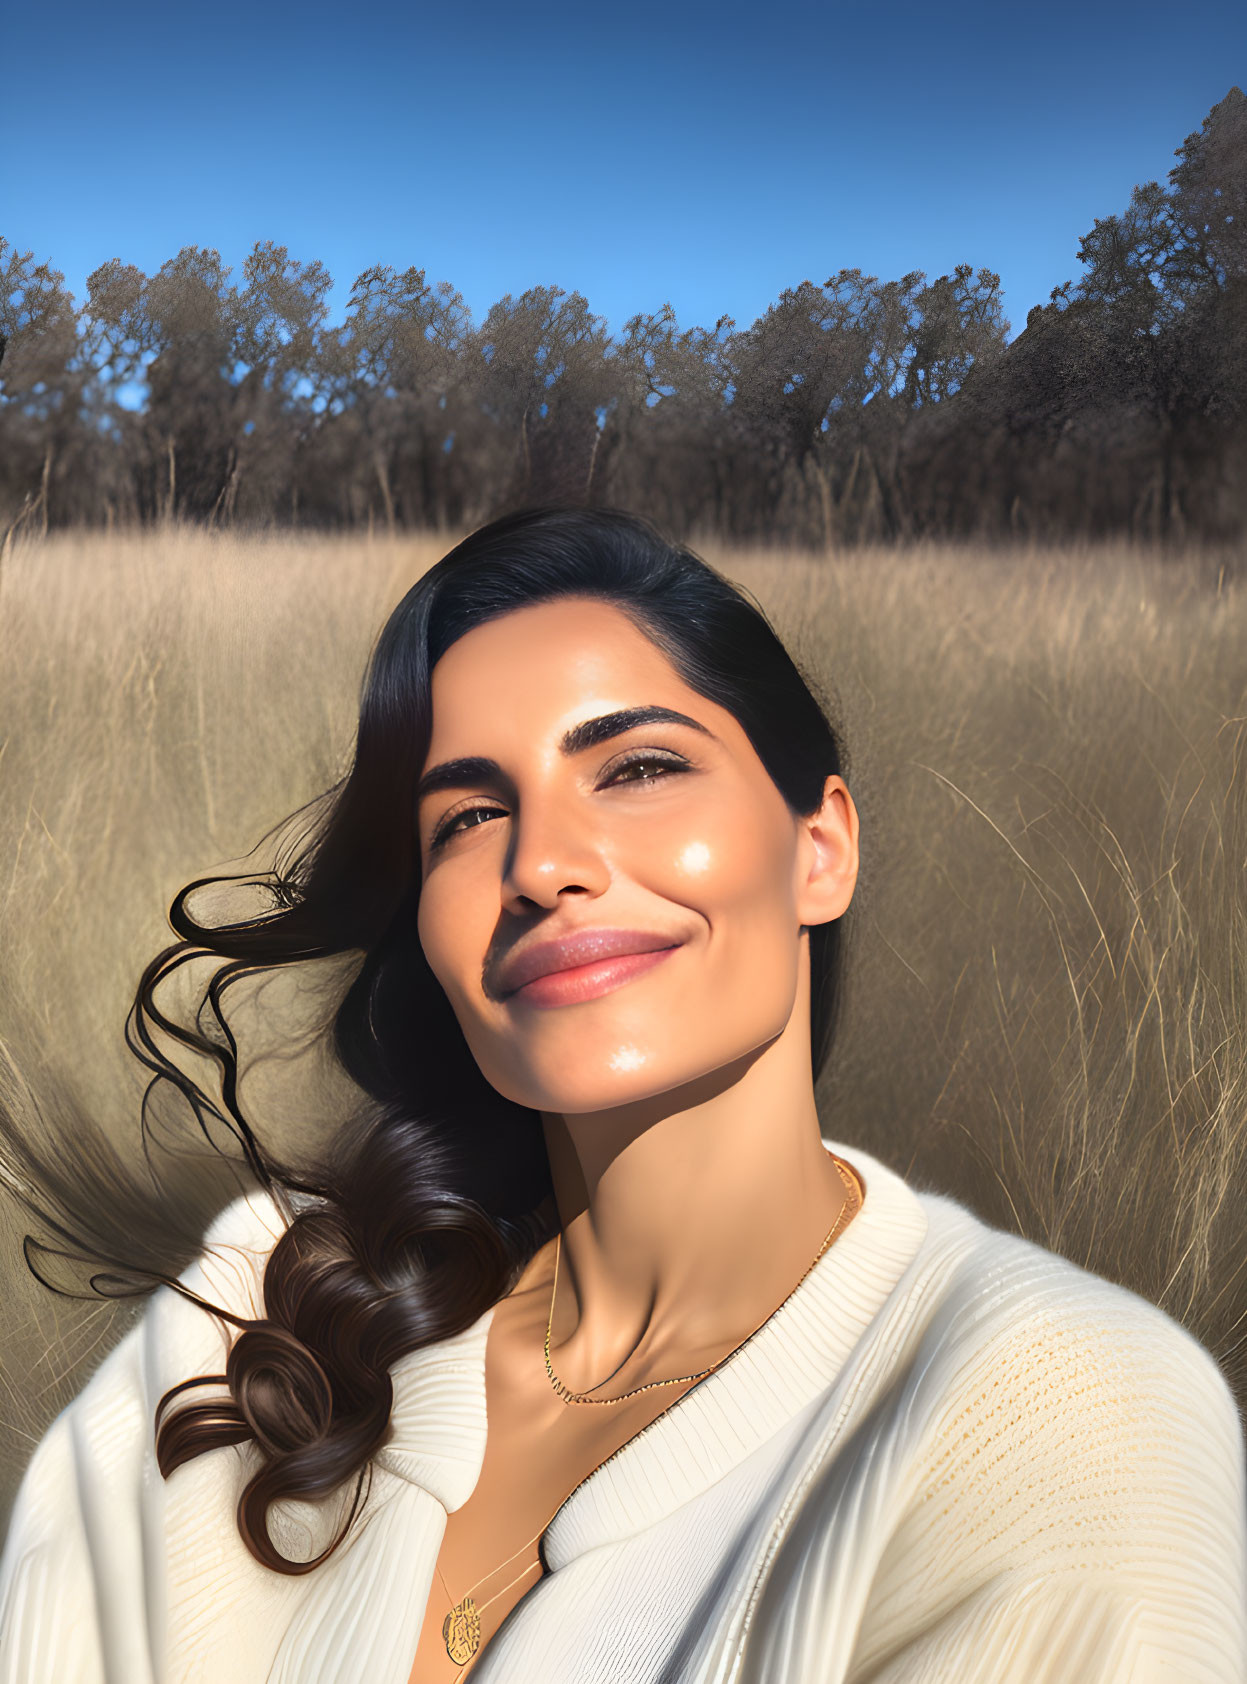 Dark-haired woman smiling in sunny field wearing white sweater and necklace